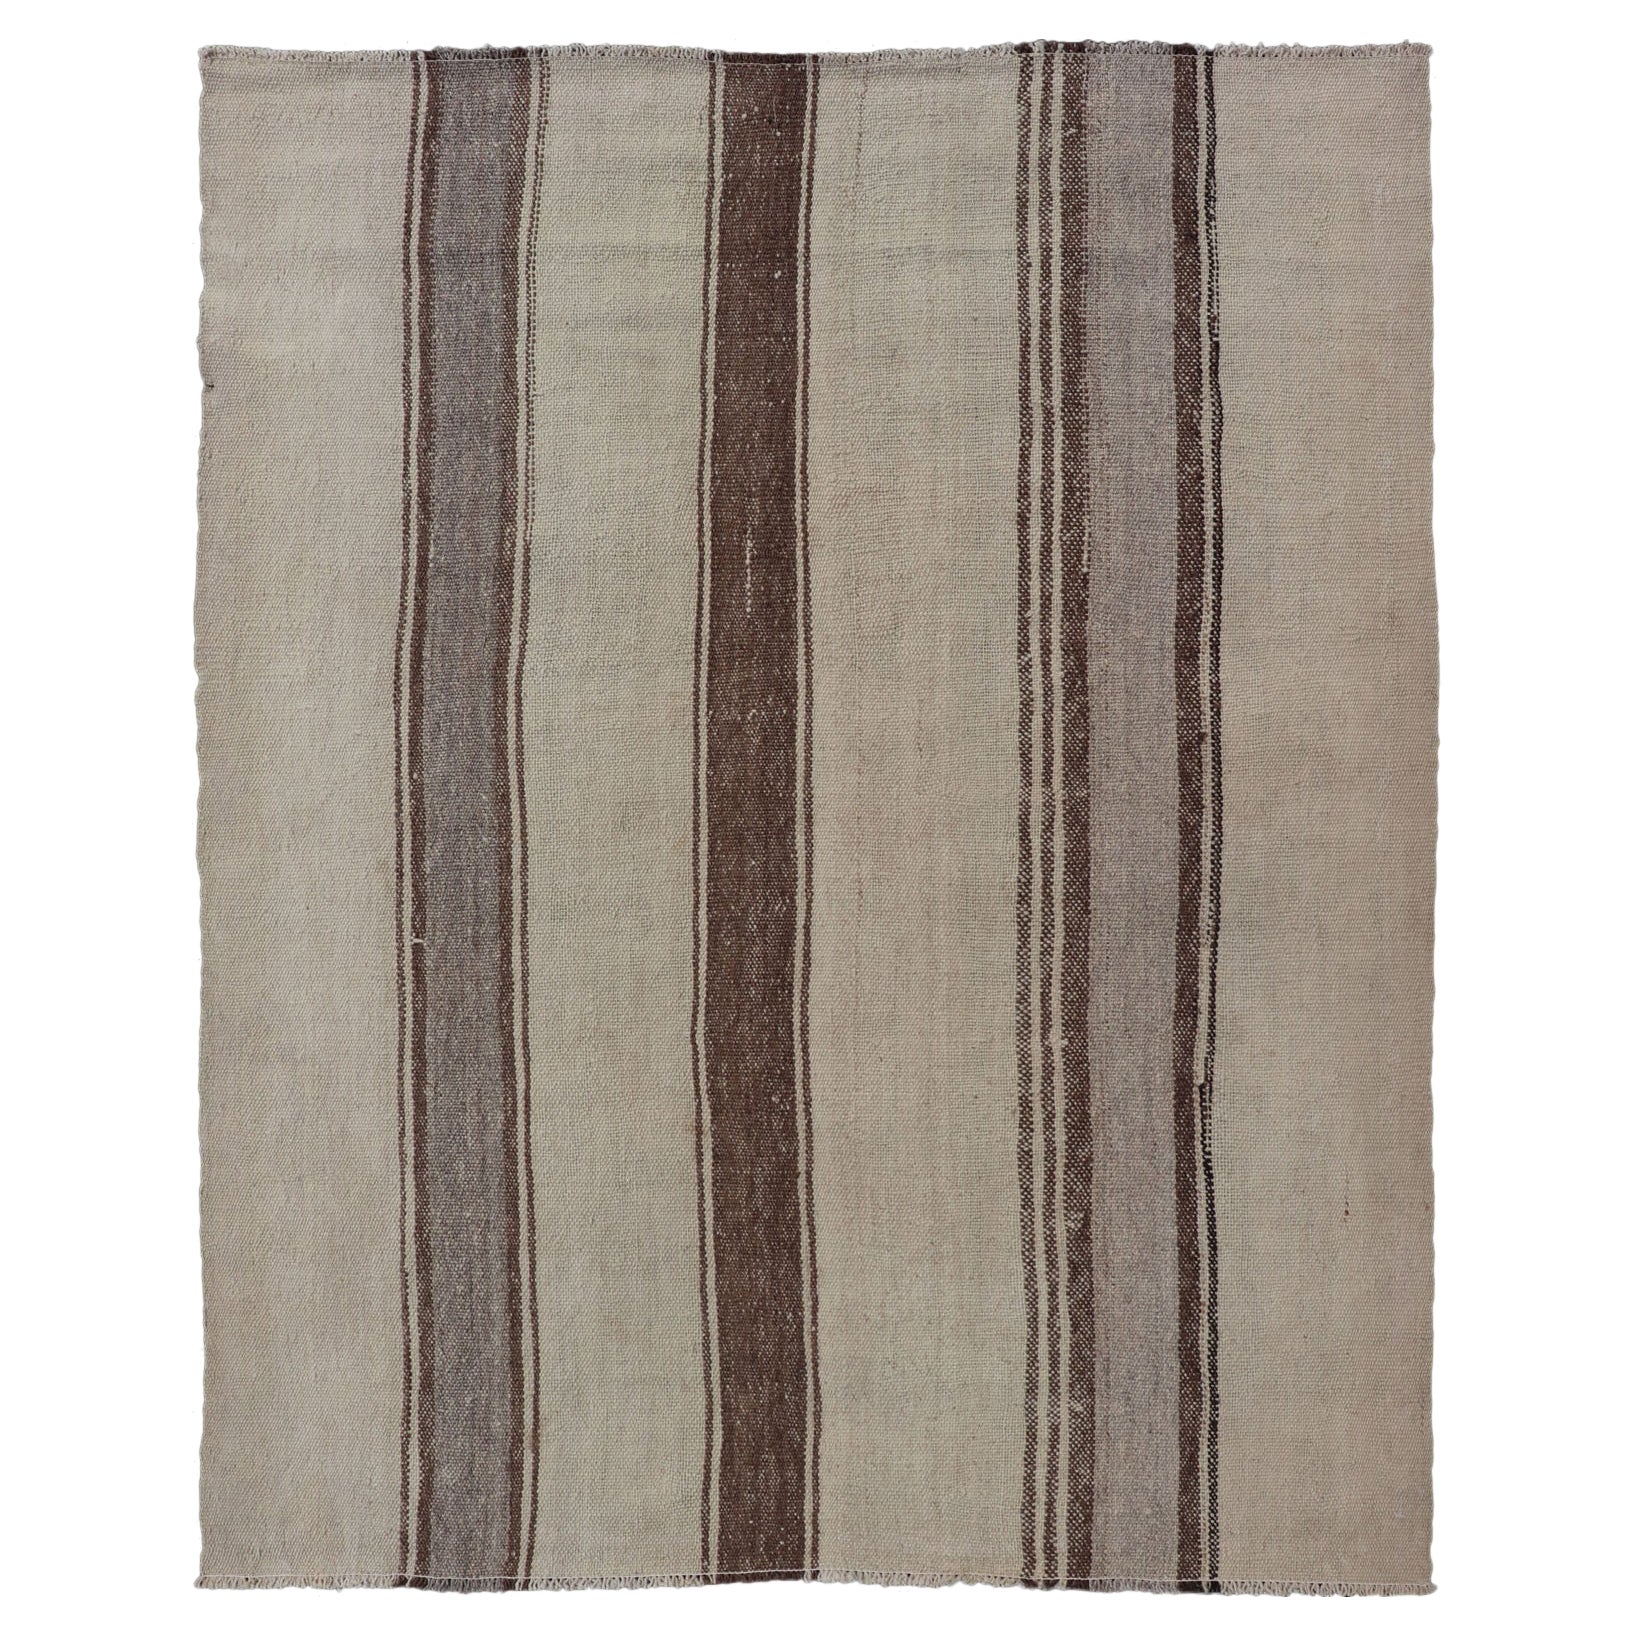 Vintage Turkish Kilim with Stripes in Tan, Gray, Taupe, Cream & Brown For Sale